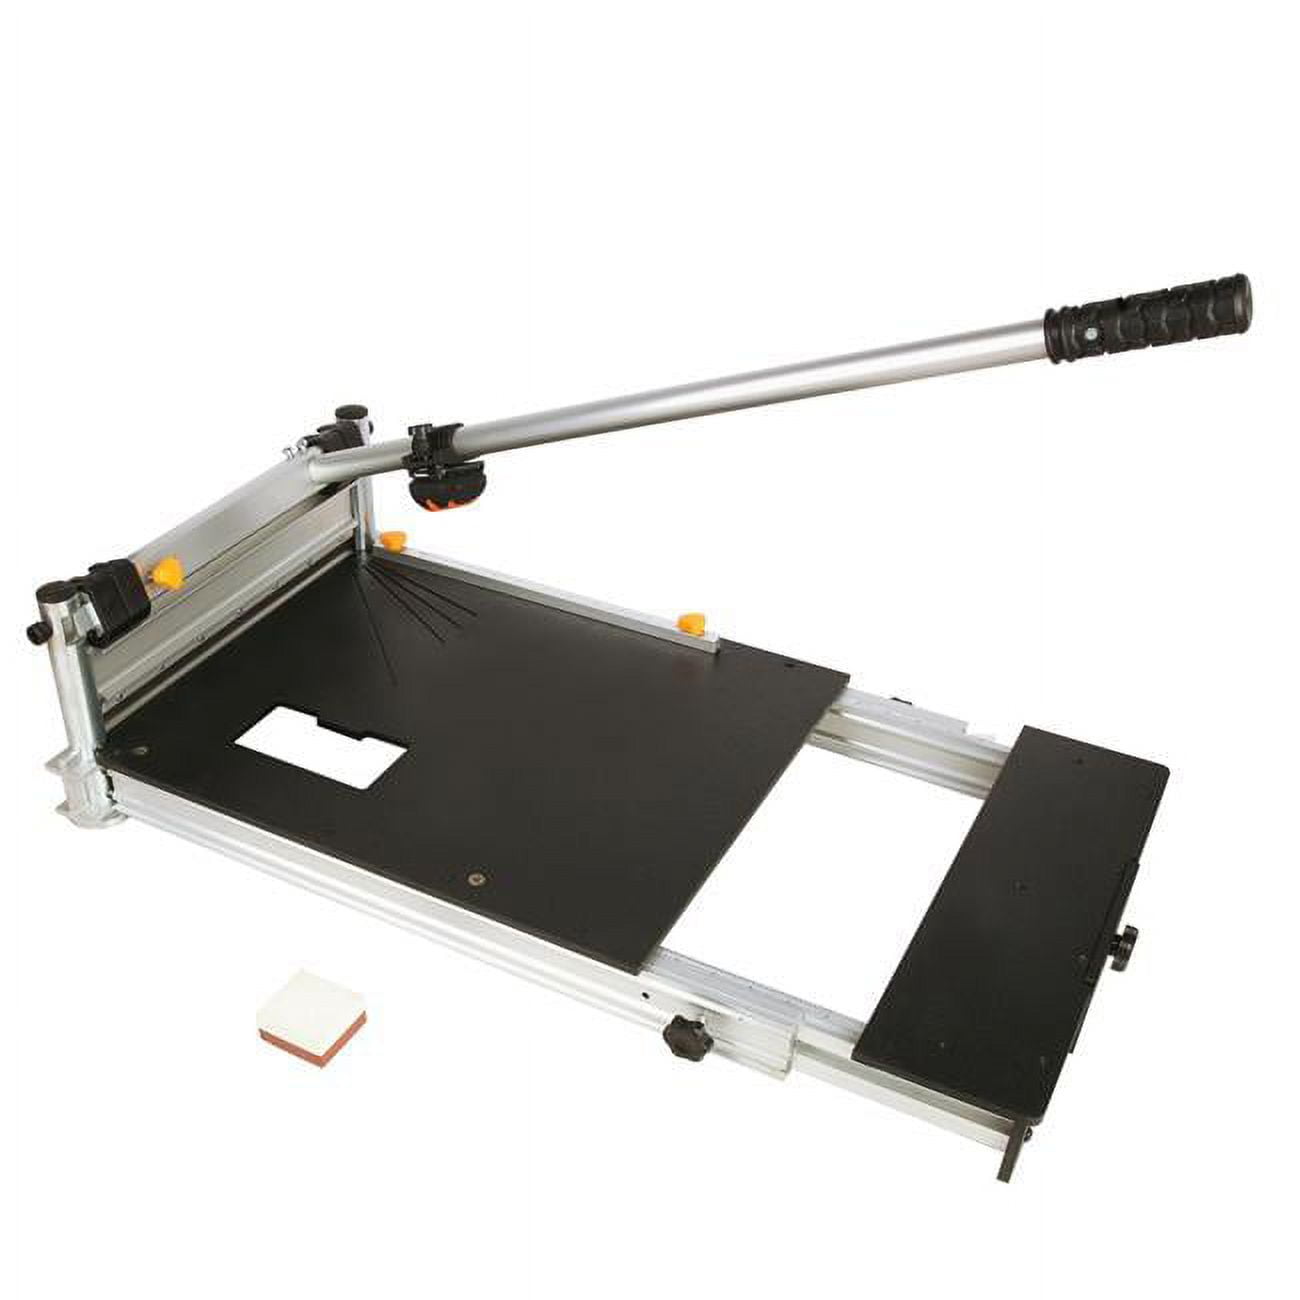 Picture of Stay Sharp 2100019 13 in. Industrial Flooring Cutter with LED Work Light & Extendable Table